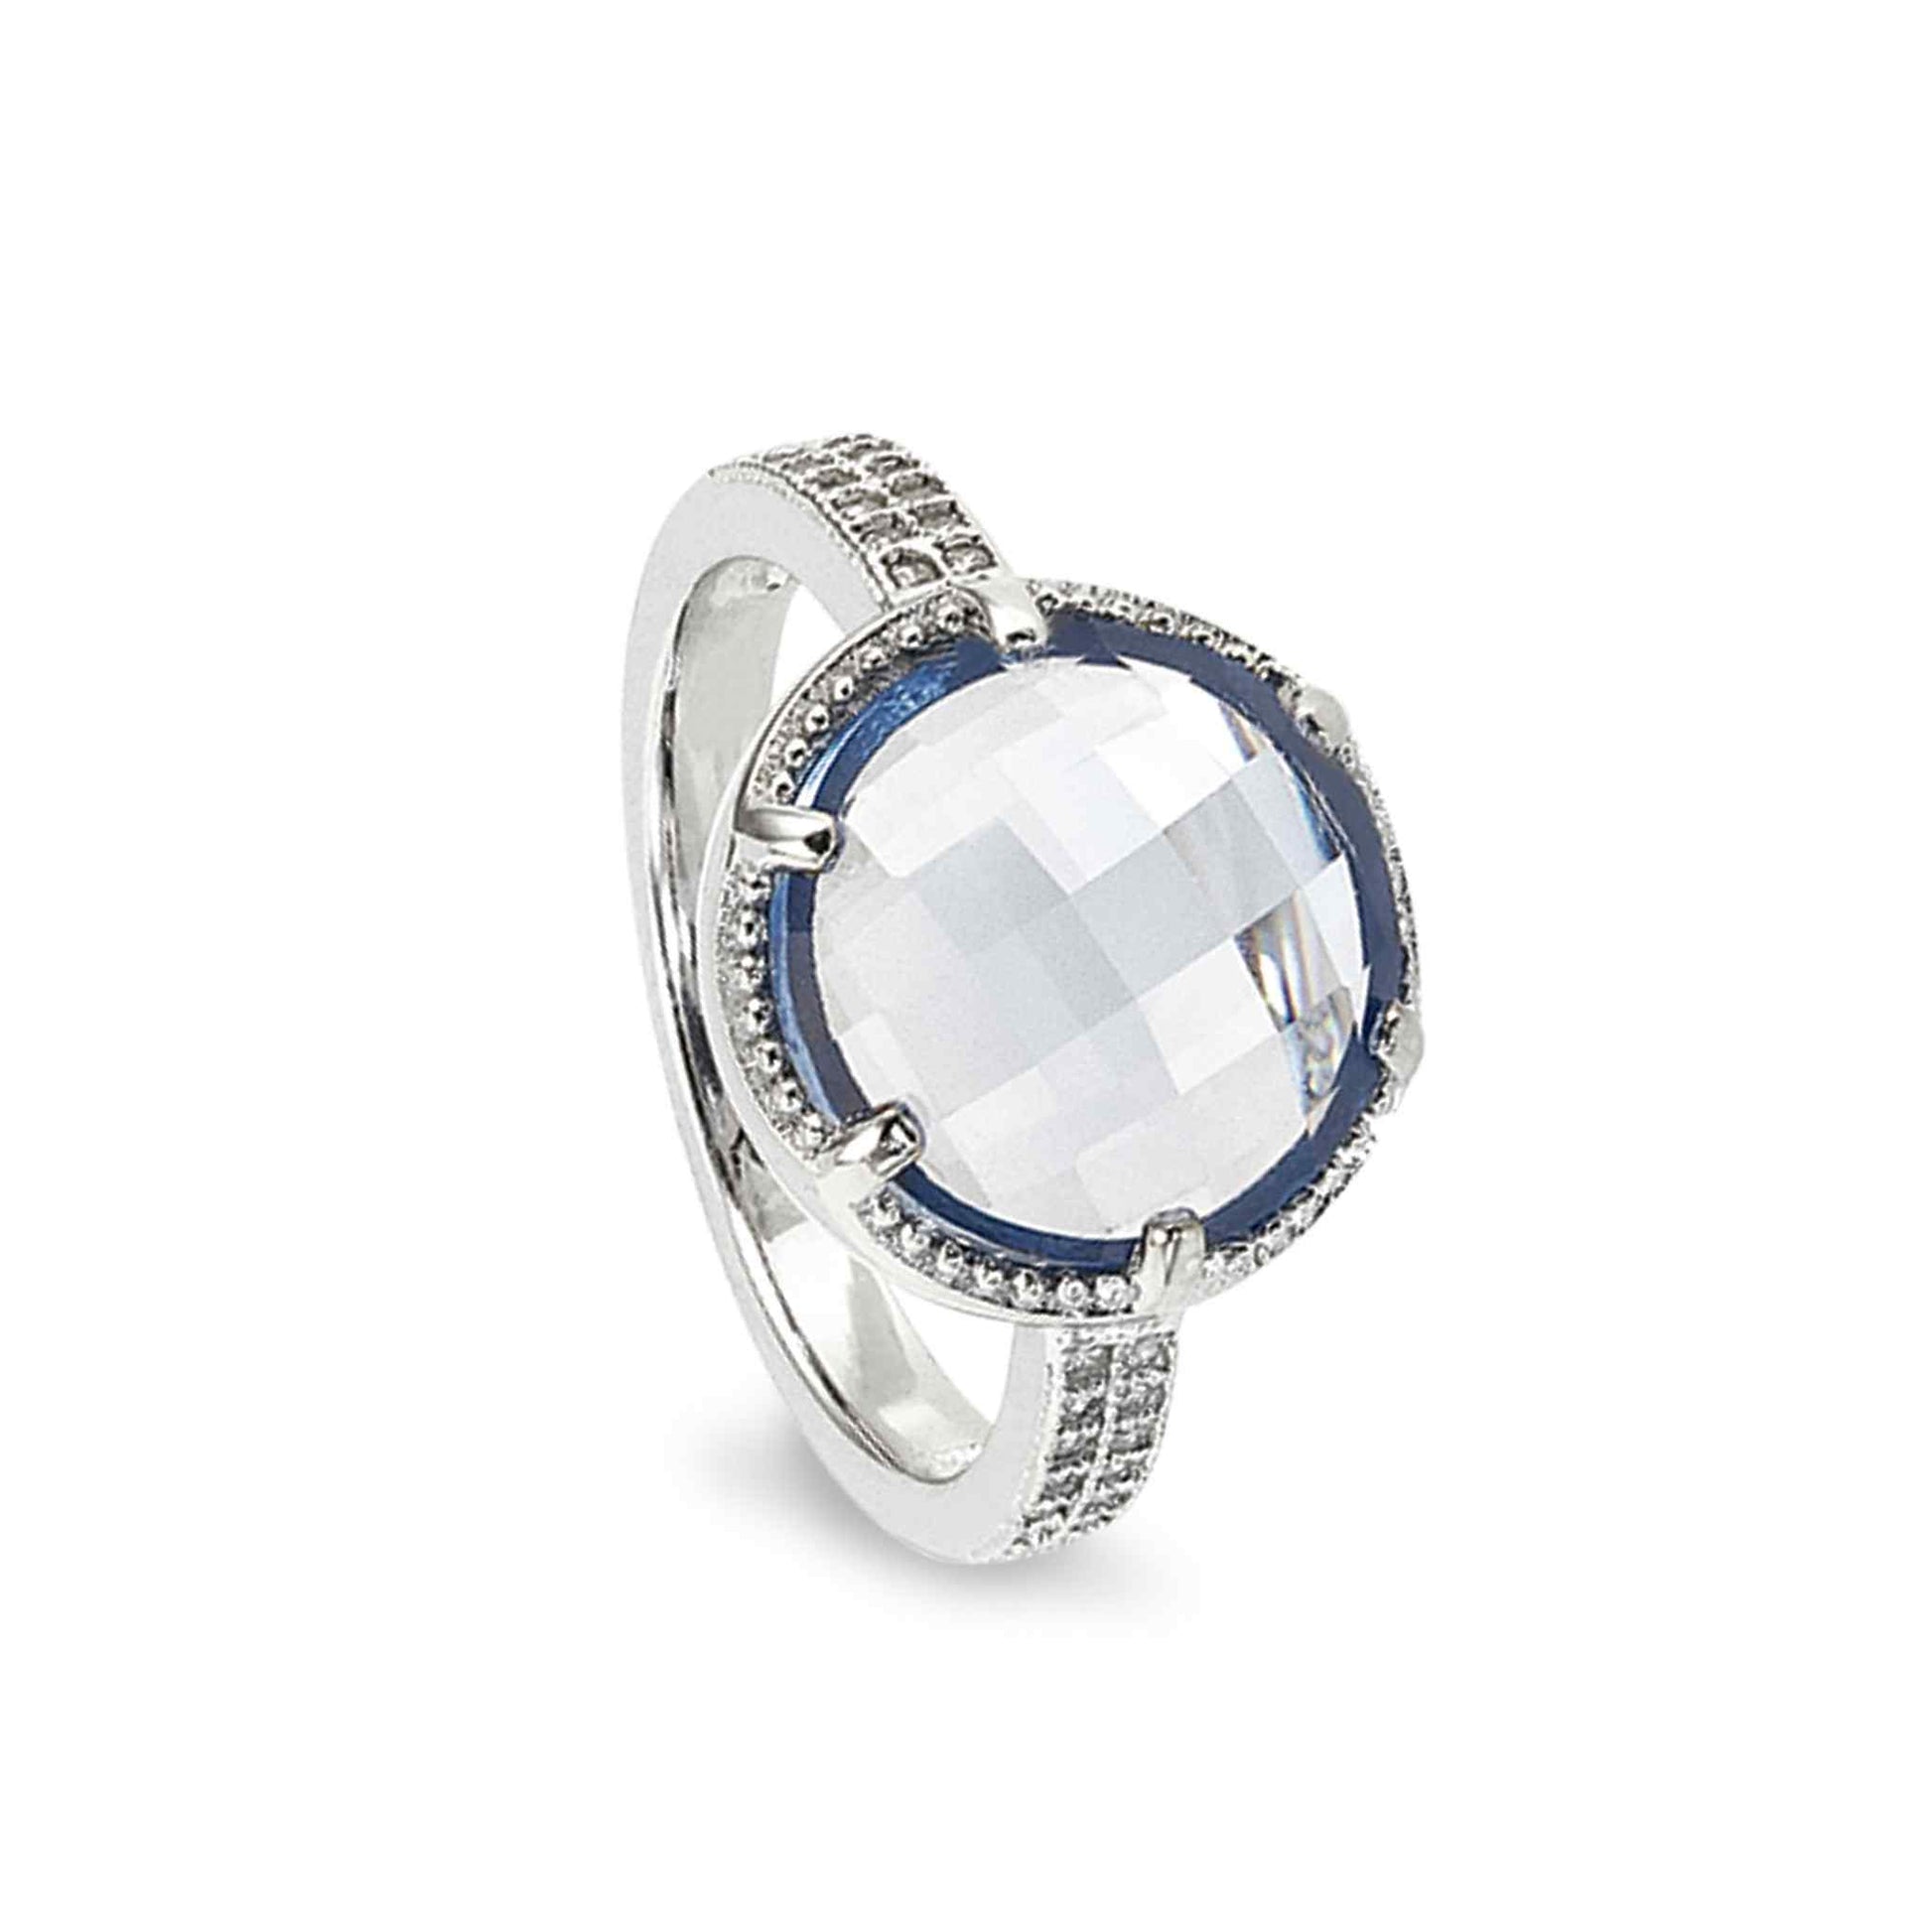 A facet cut blue ring with simulated diamonds displayed on a neutral white background.